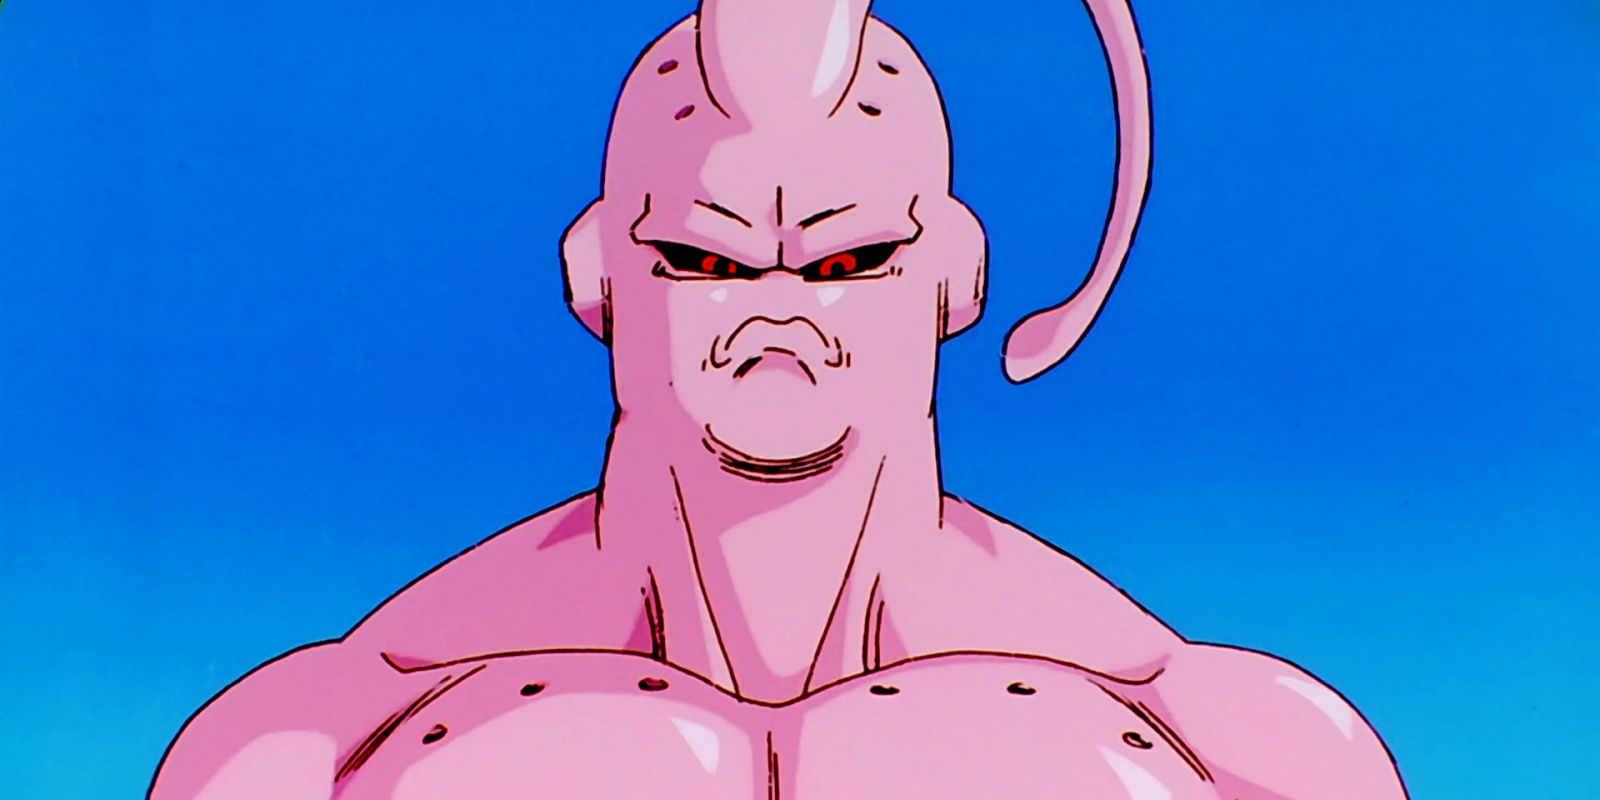 A still of Super Buu from the Dragon Ball anime franchise.